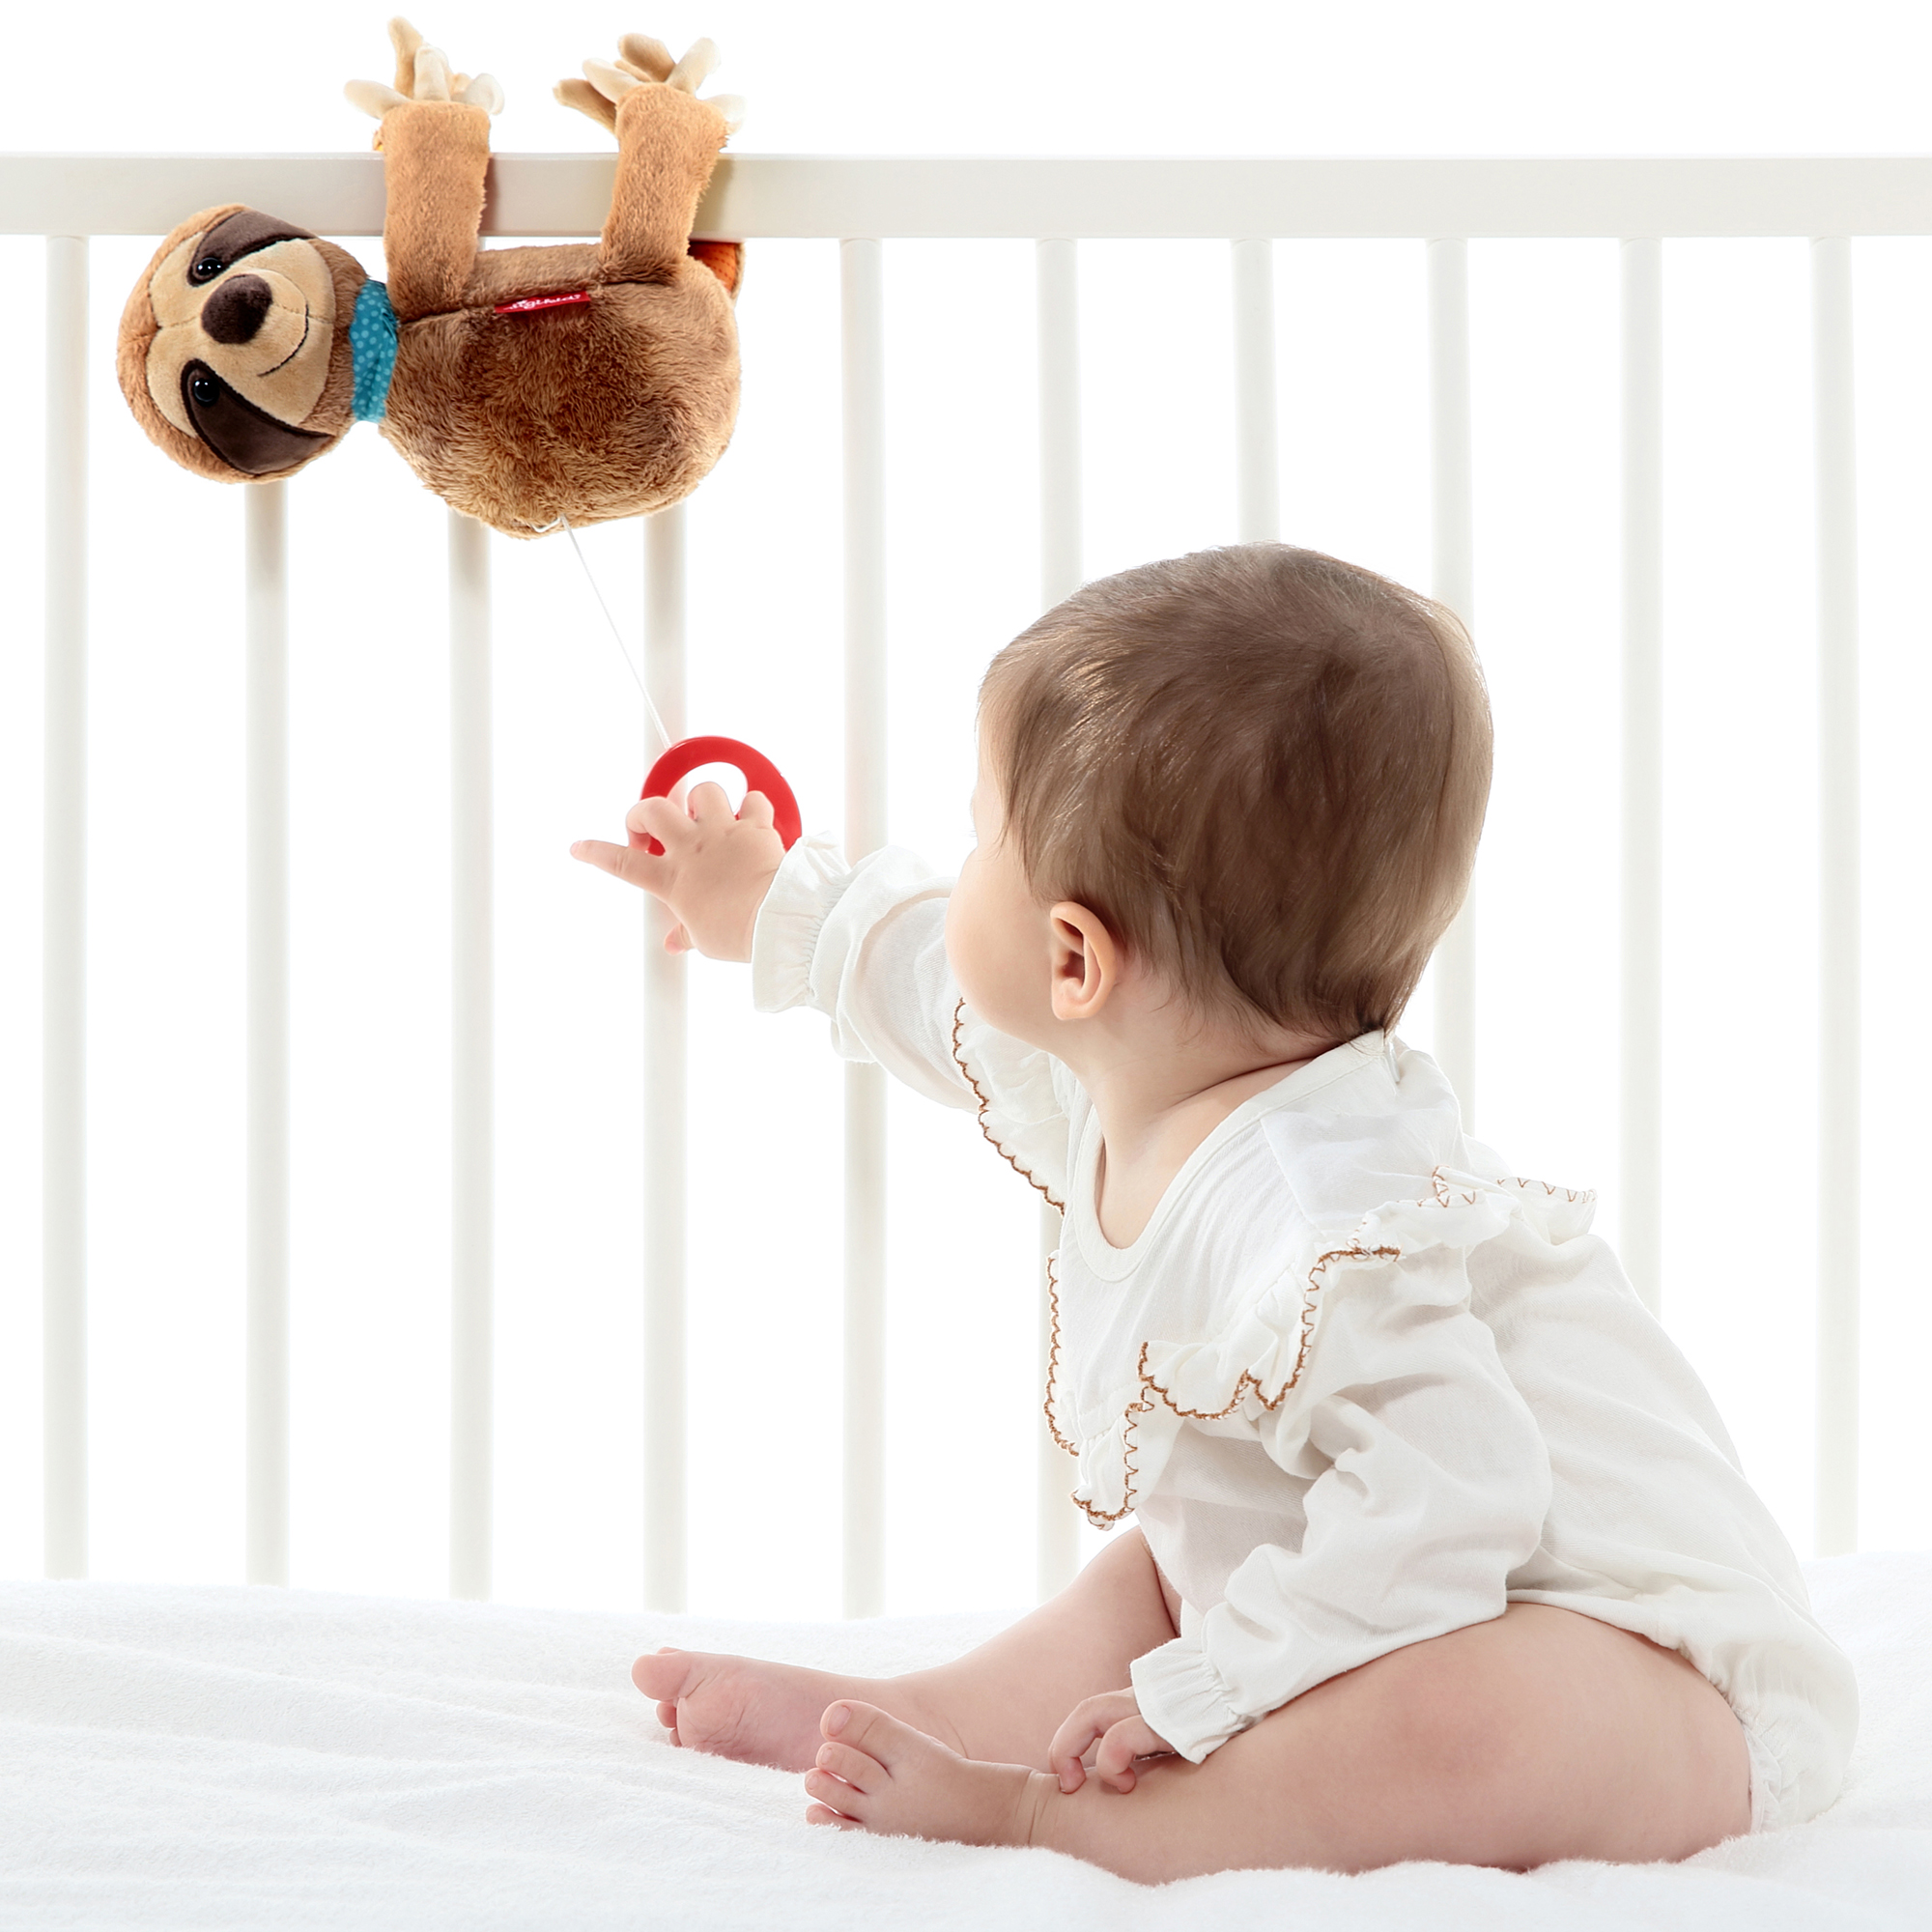 Hanging musical toy sloth